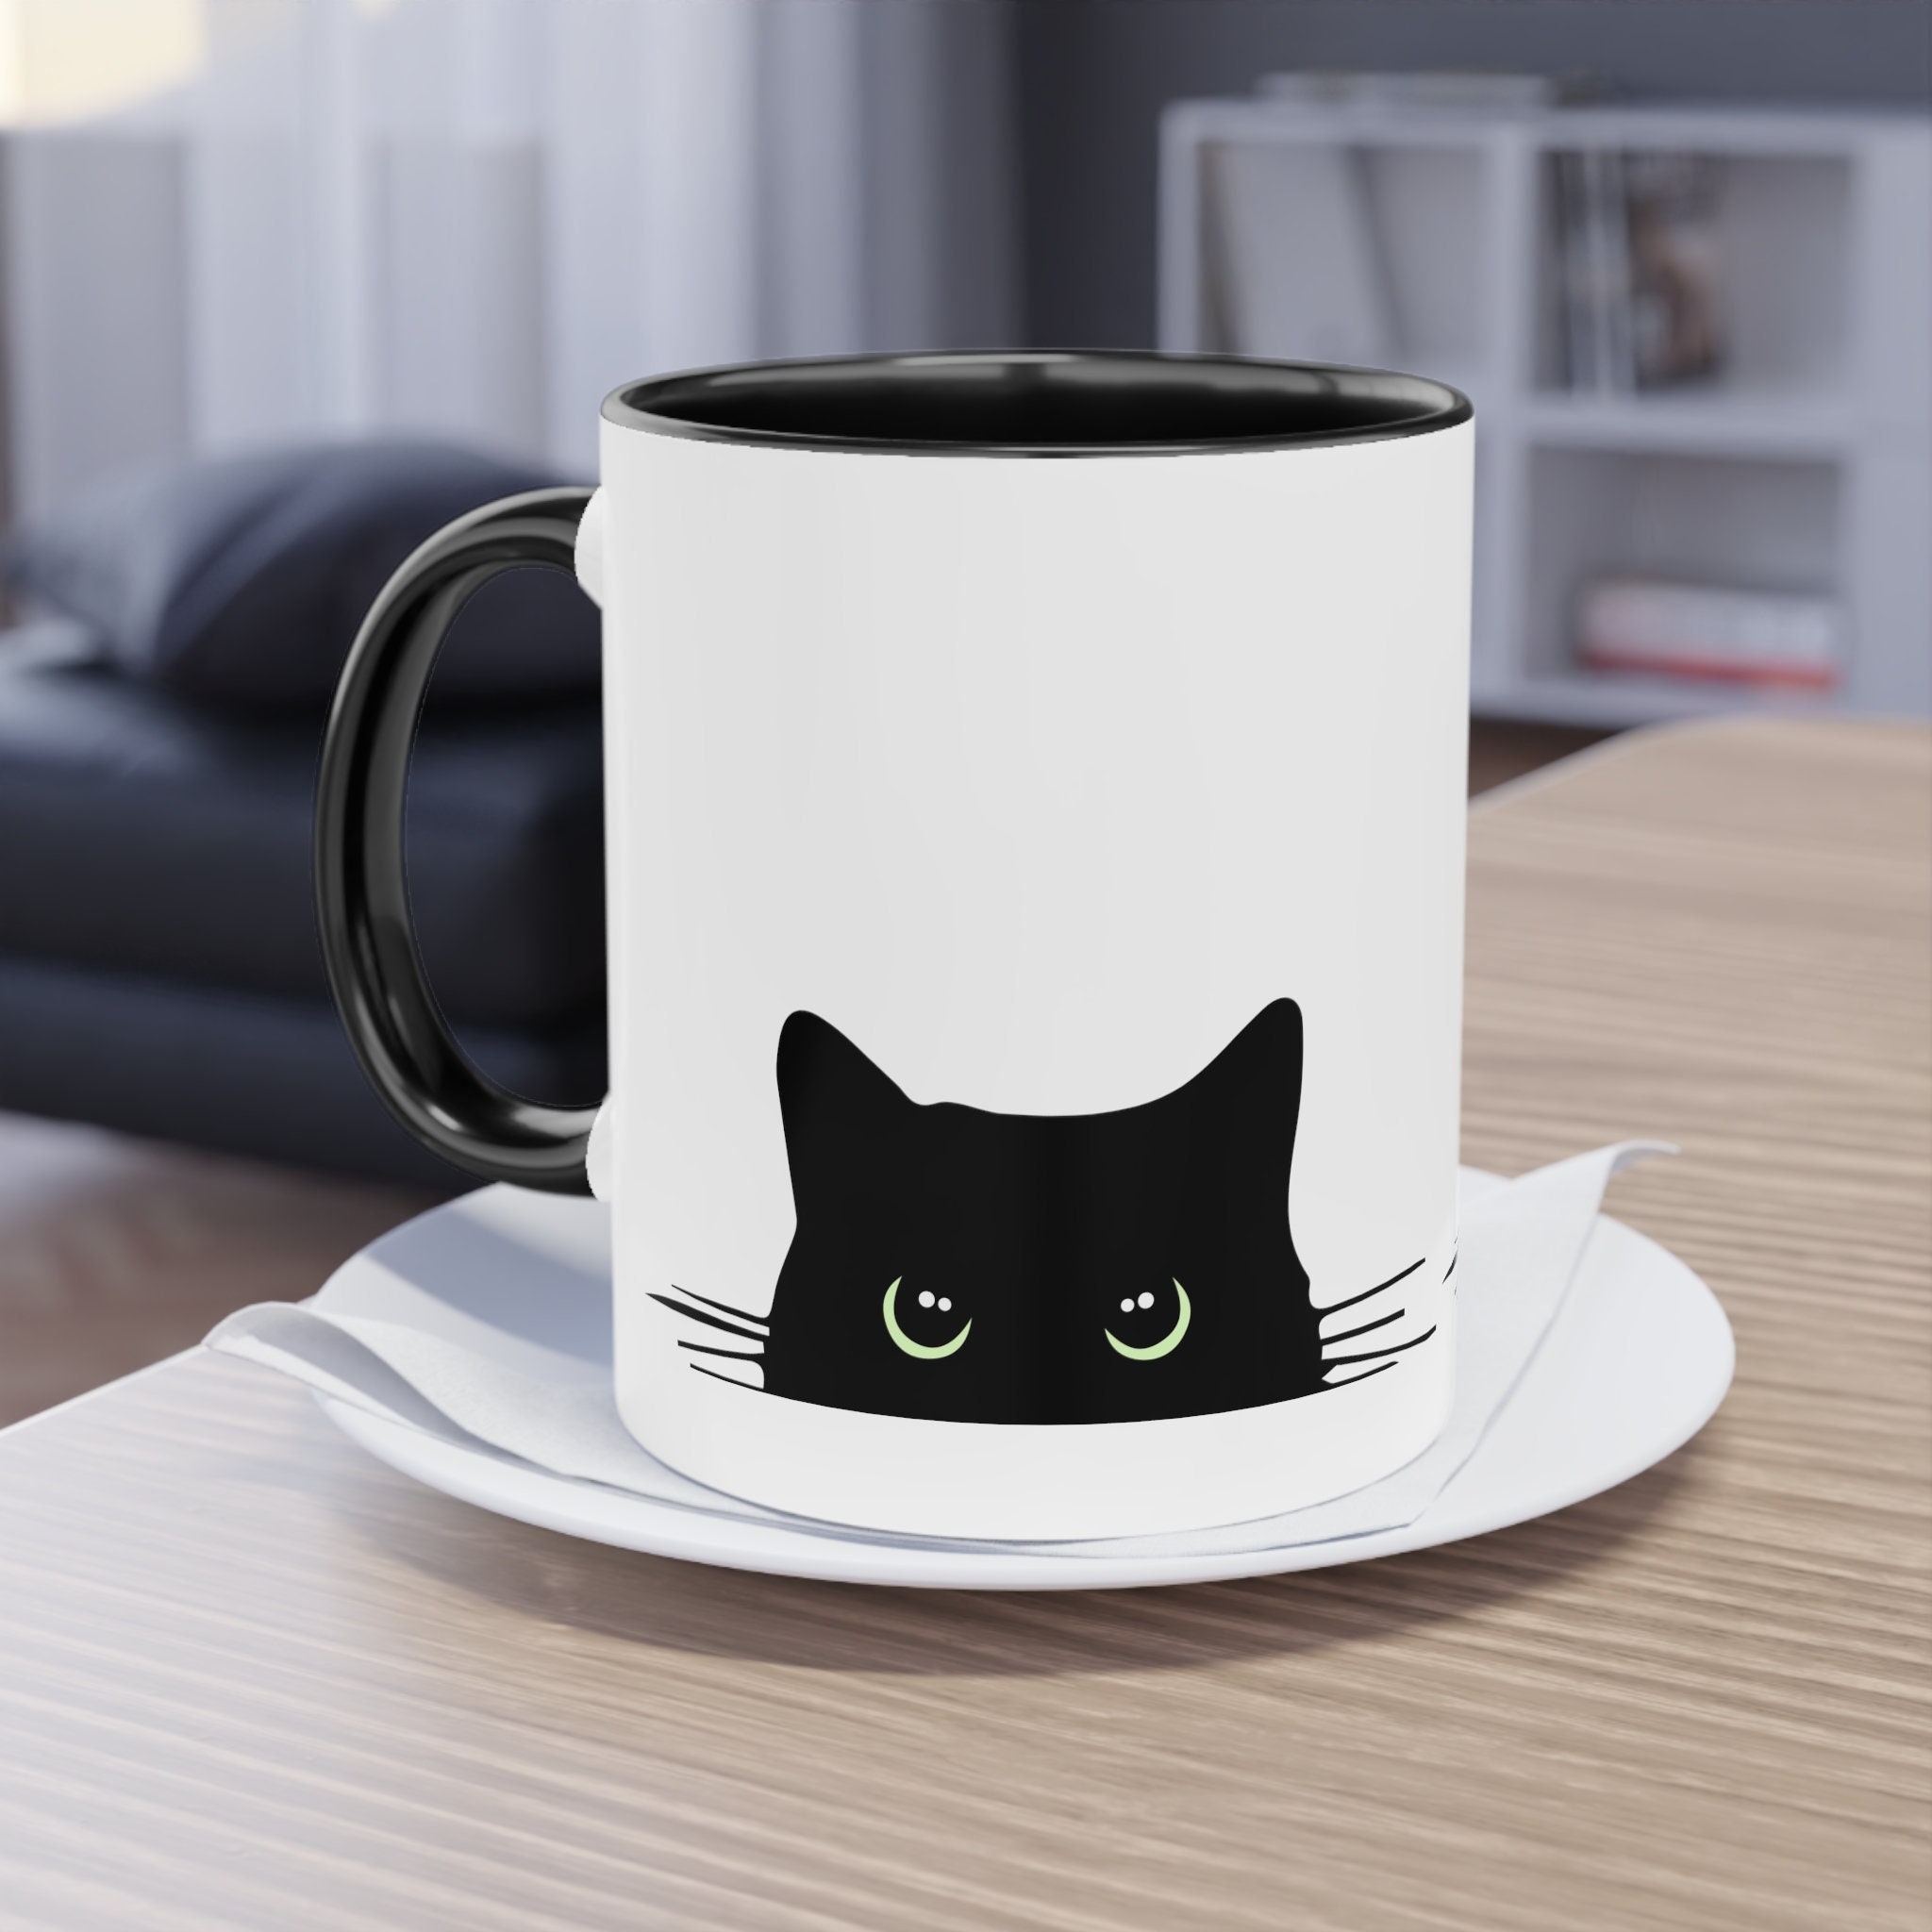 Buy Black Cat Coffee Cup Online In India Etsy India